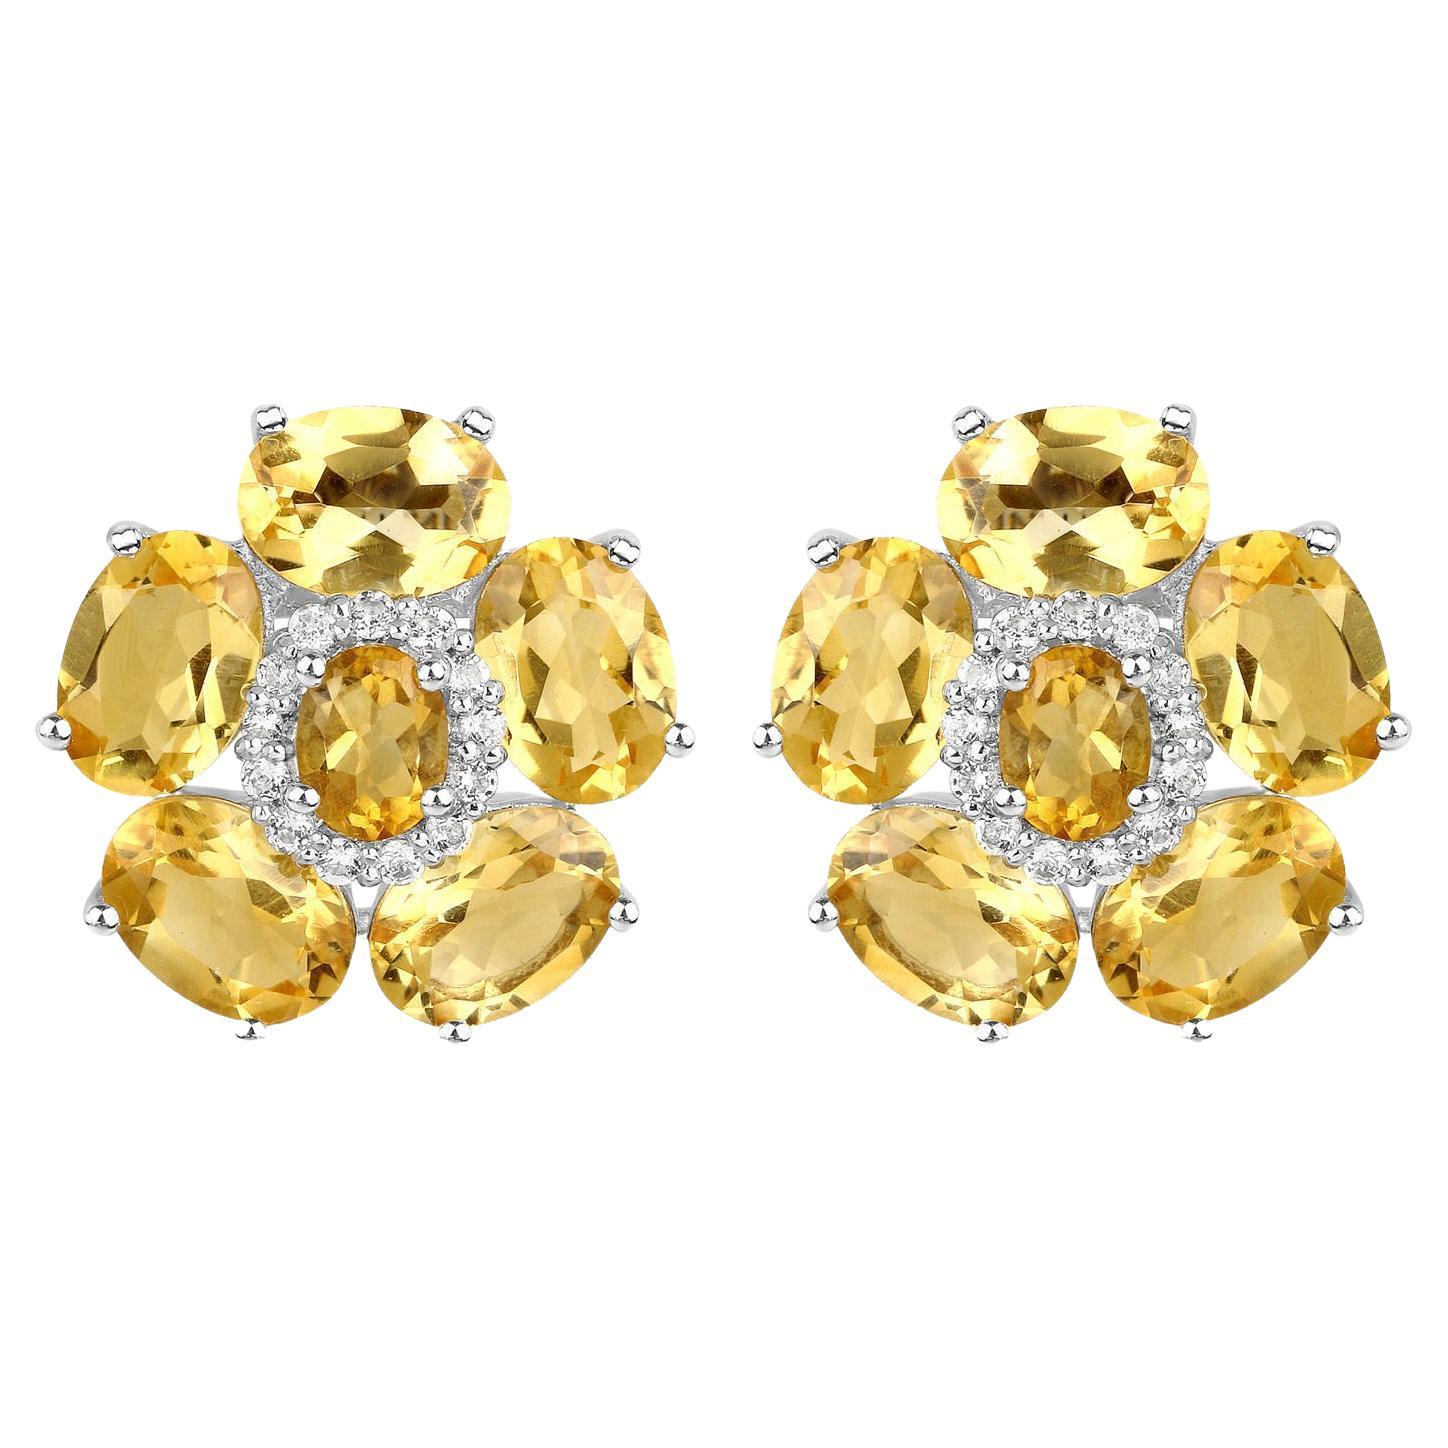 Natural Citrine and White Topaz Floral Earrings 8.9 Carats Total